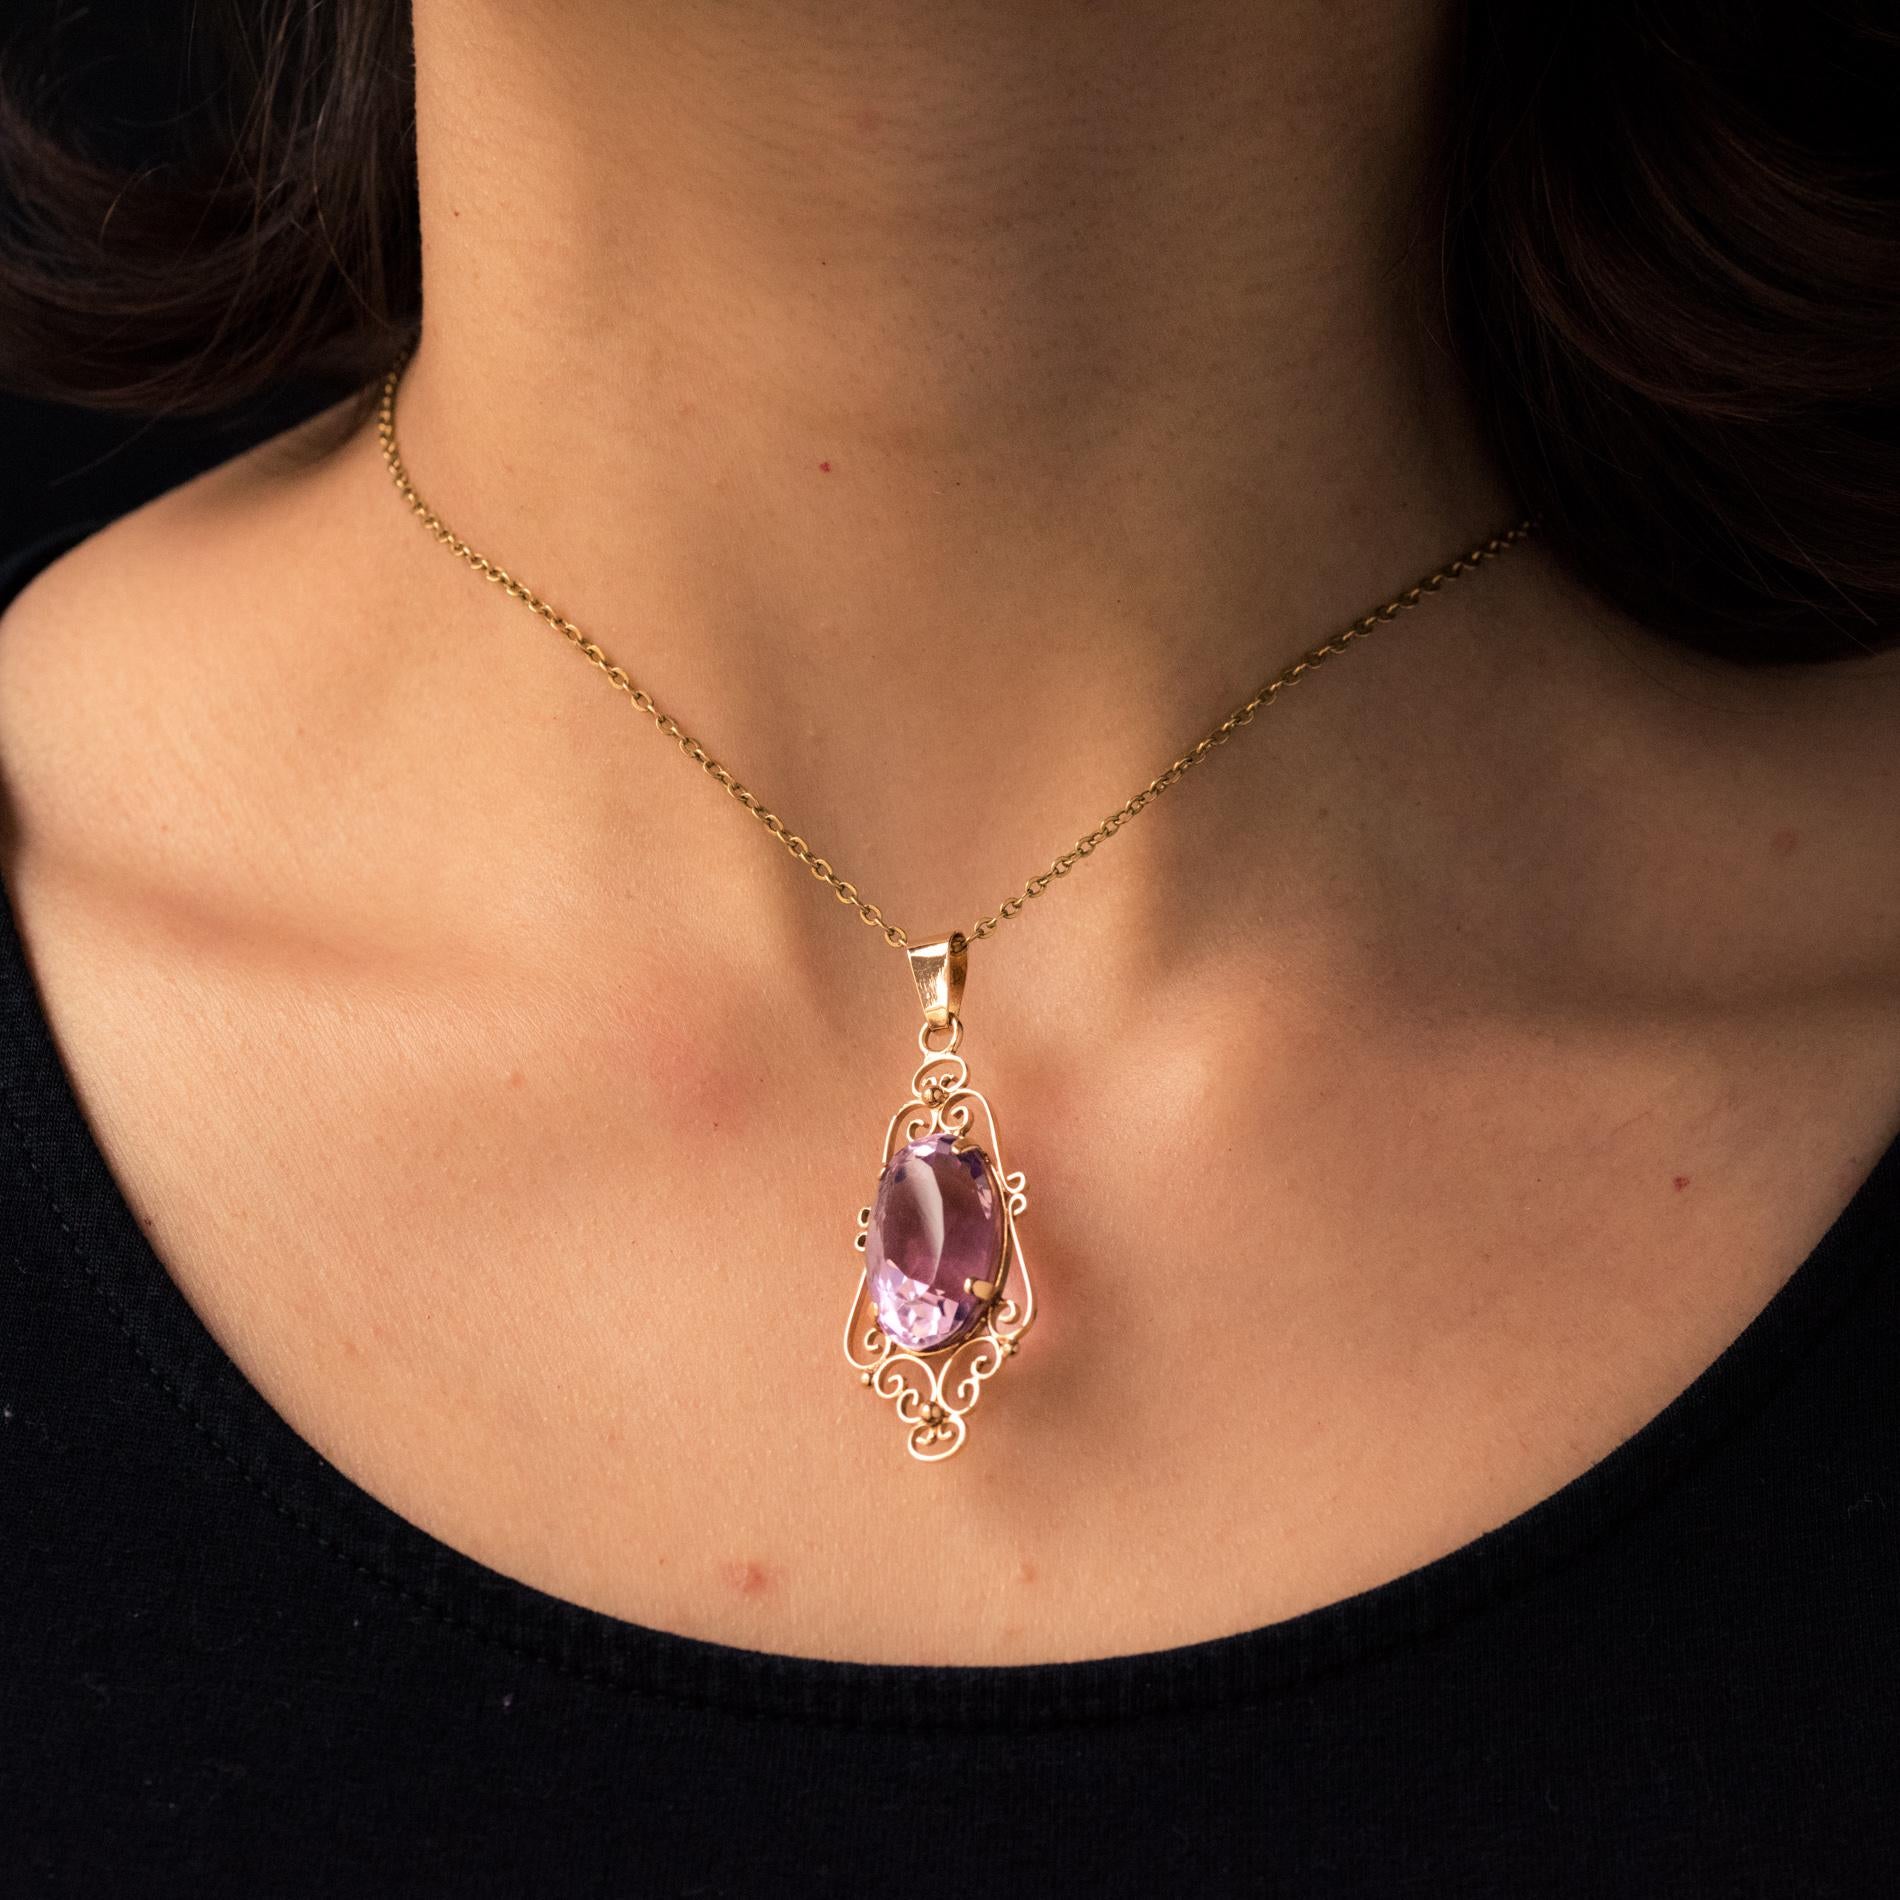 Pendant in 18 karat rose gold.
Charming antique jewel, the mounting is made of gold threads forming arabesques. In the center a splendid and important amethyst is set.
Amethyst weight: approximately 16.5 carats.
Total height: 5.1 cm, width at